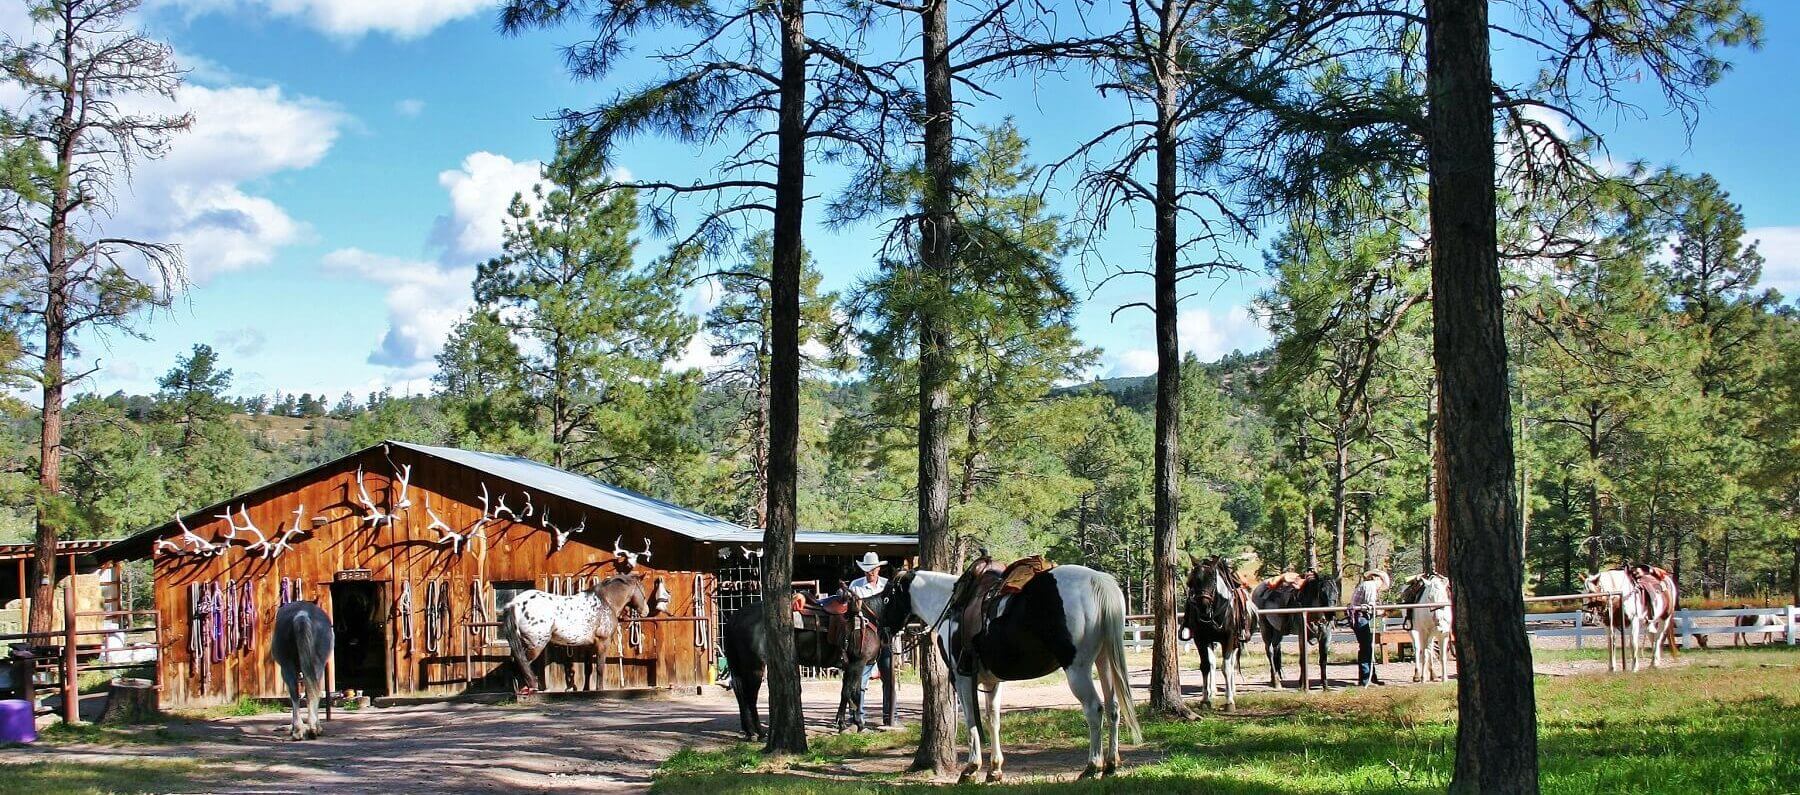 Geronimo Trail Guest Ranch: Your Dude Ranch Vacation Packing List.